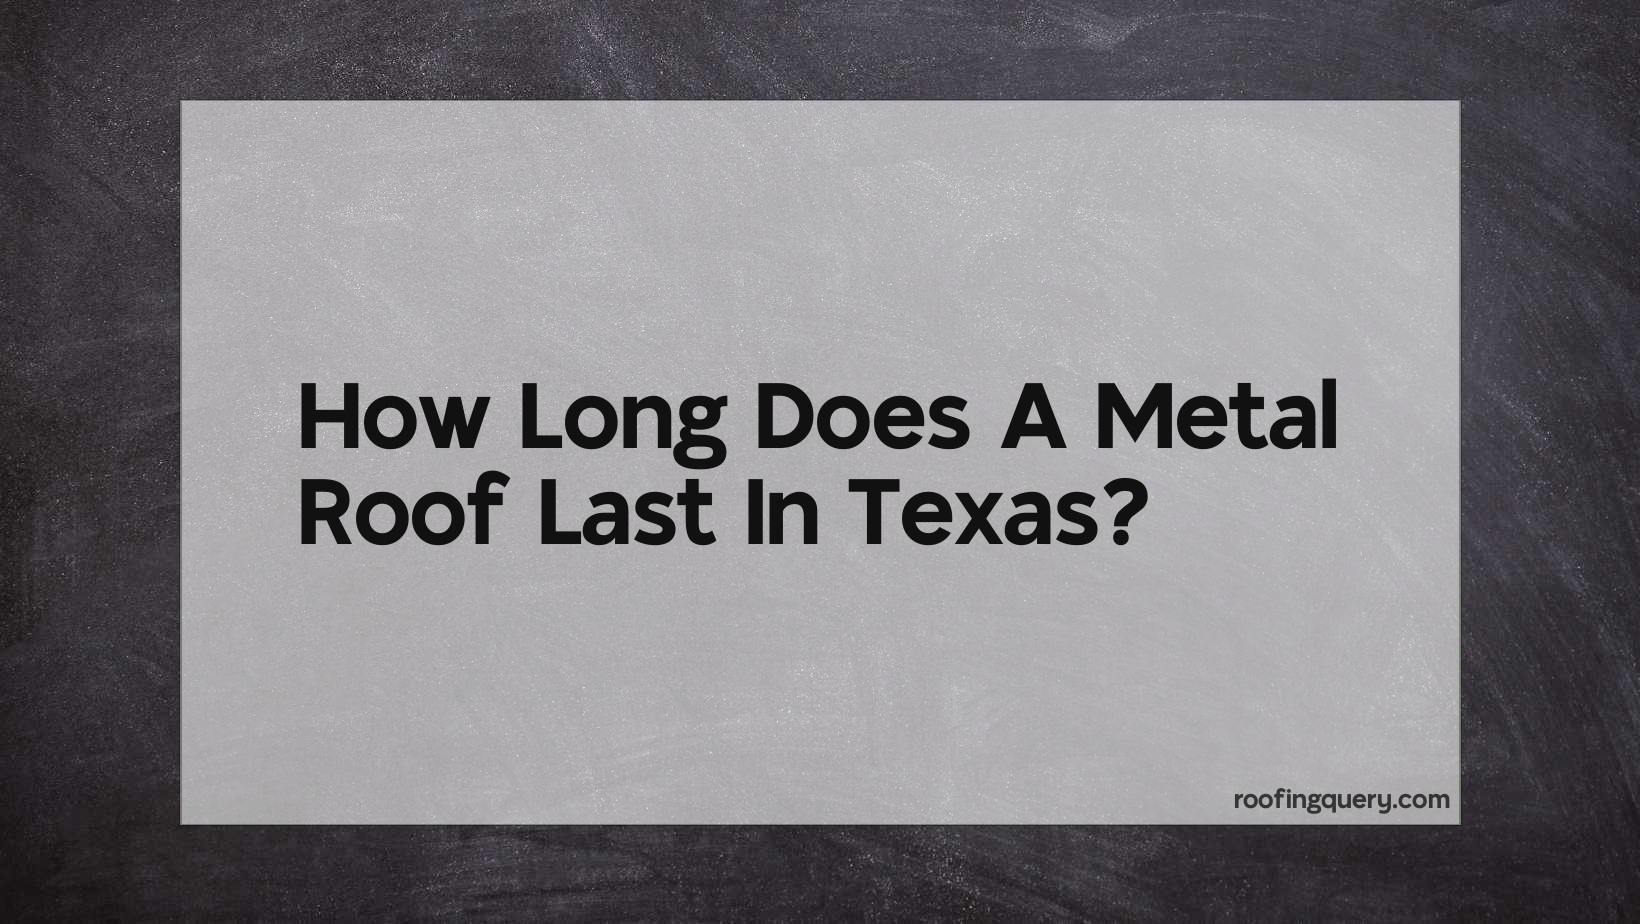 How Long Does A Metal Roof Last In Texas?